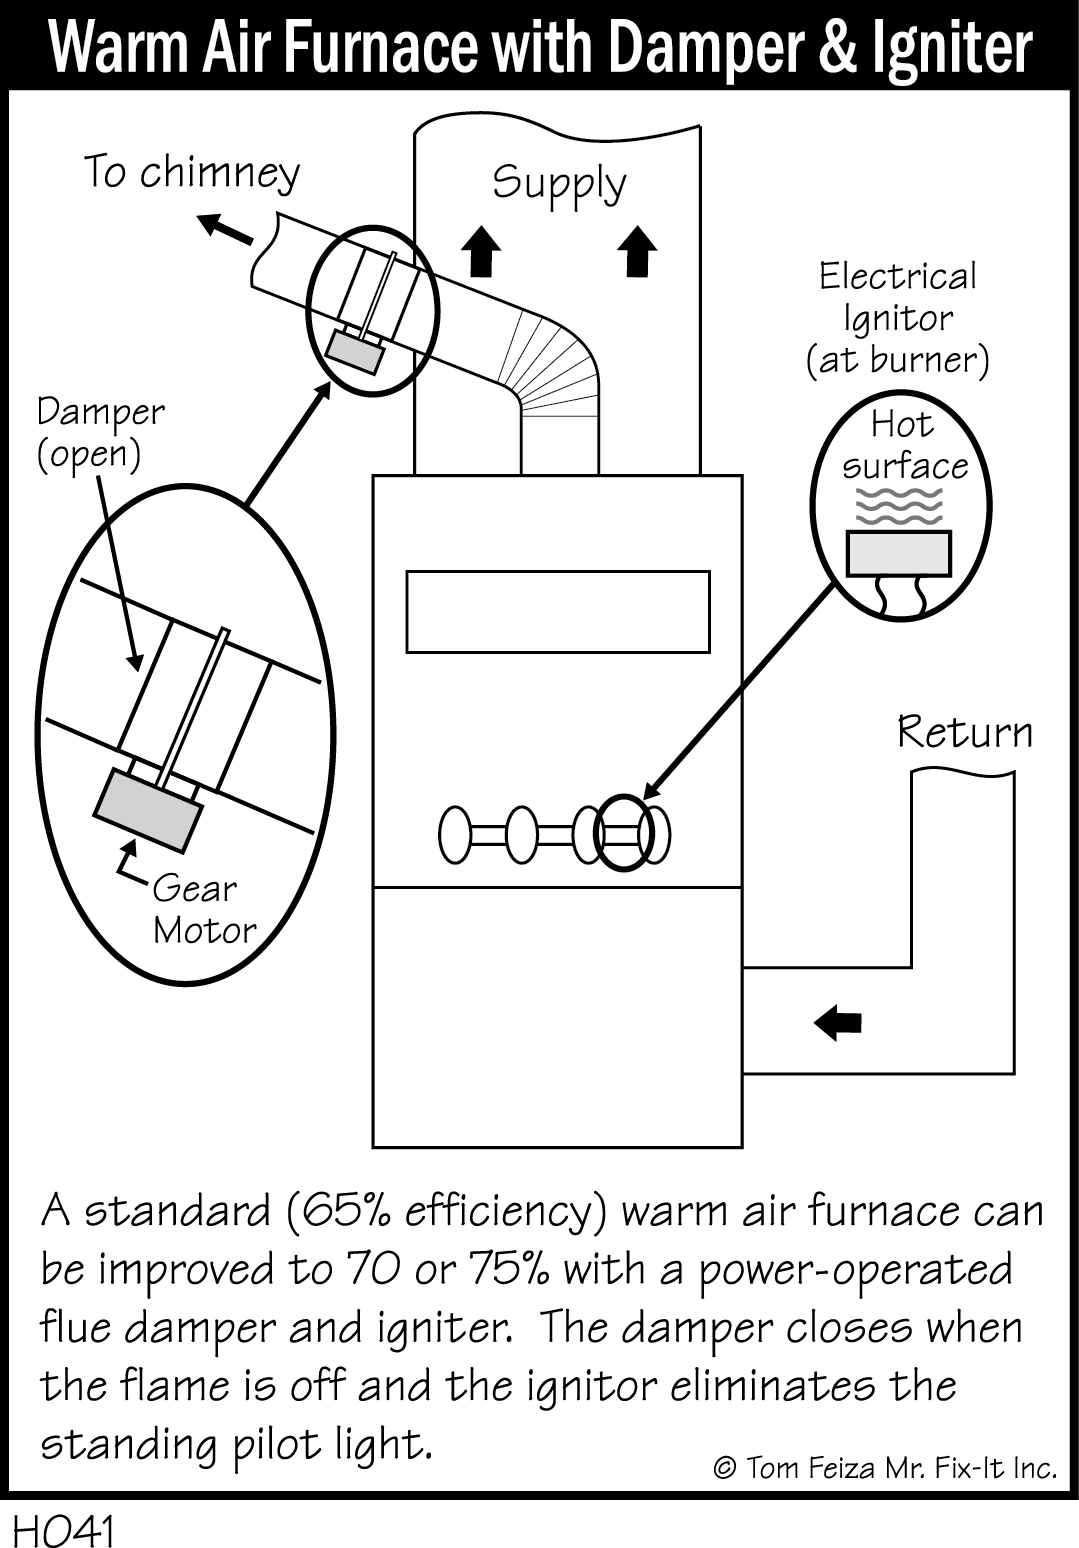 H041 - Warm Air Furnace with Damper and Igniter